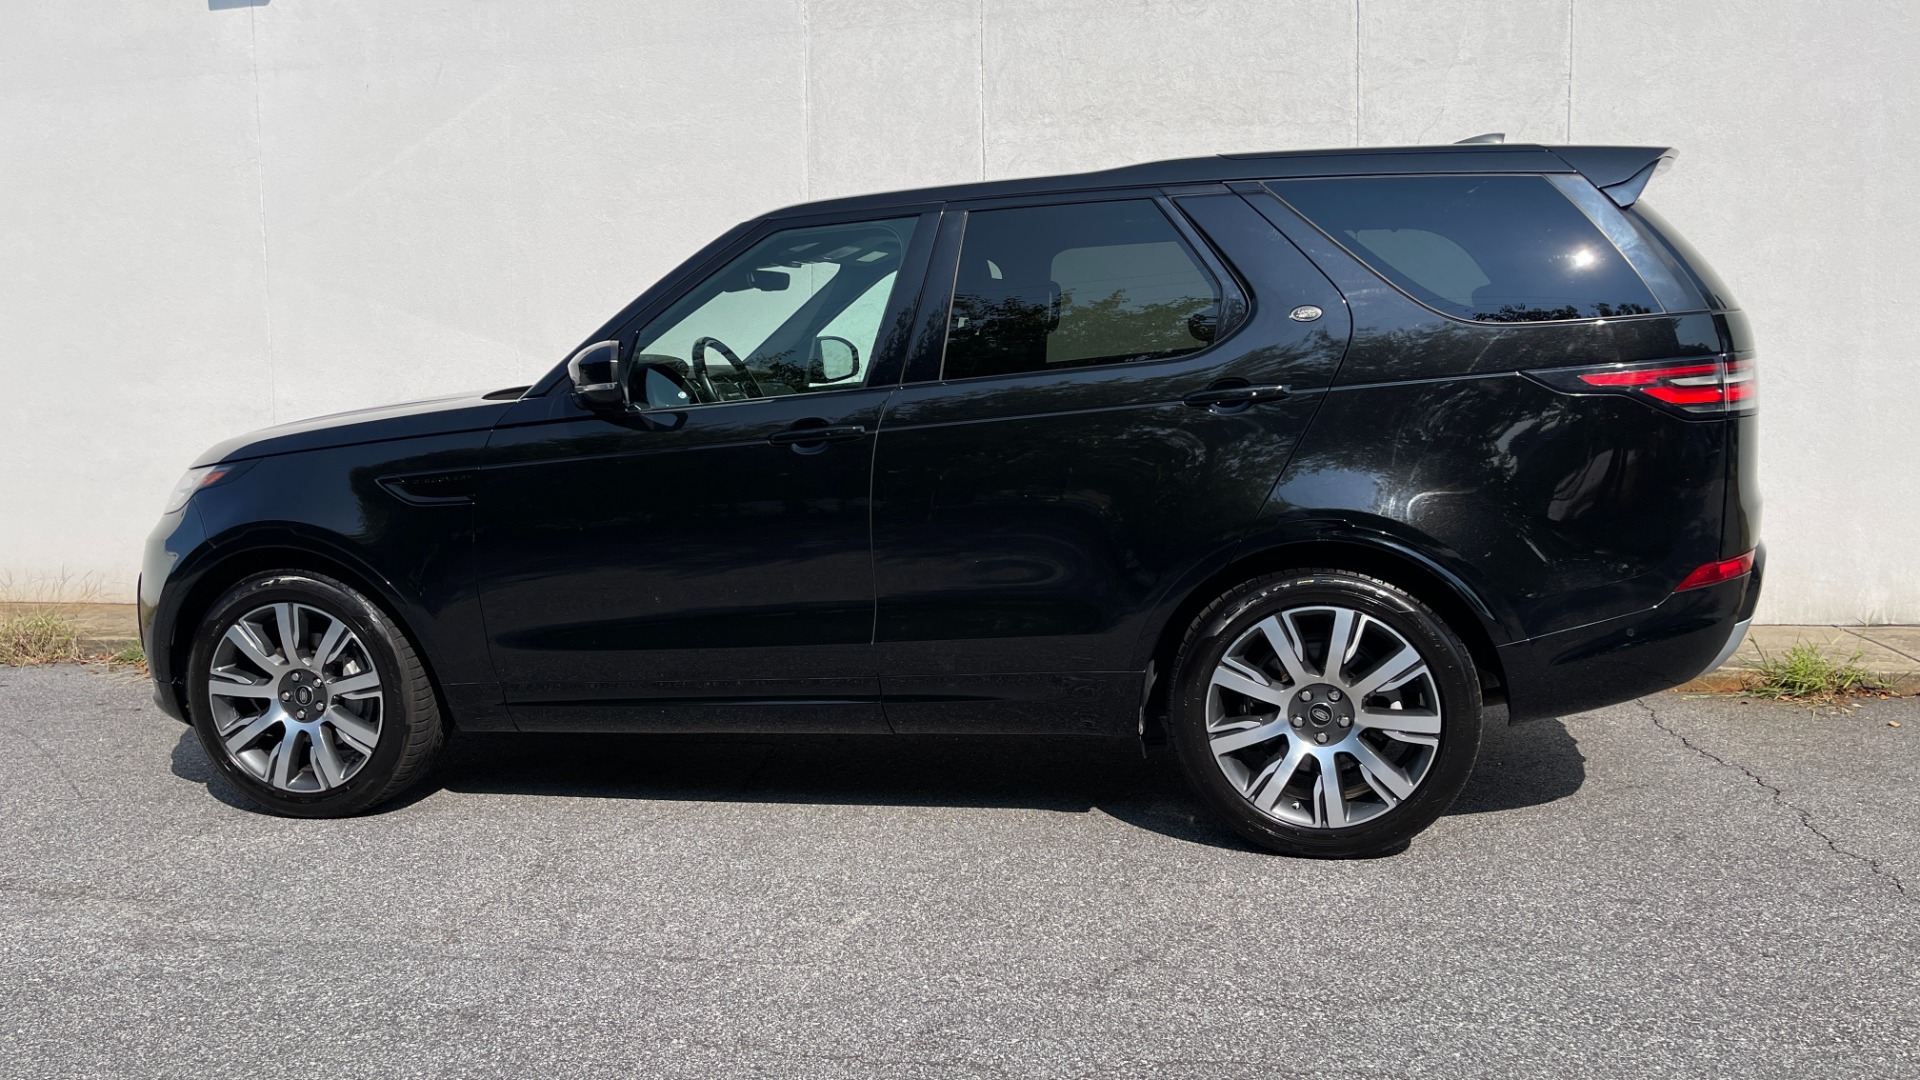 Used 2019 Land Rover Discovery HSE / SEVEN SEAT / DYNAMIC PACKAGE / 21IN WHEELS / REMOTE SEAT PACKAGE for sale $36,500 at Formula Imports in Charlotte NC 28227 9